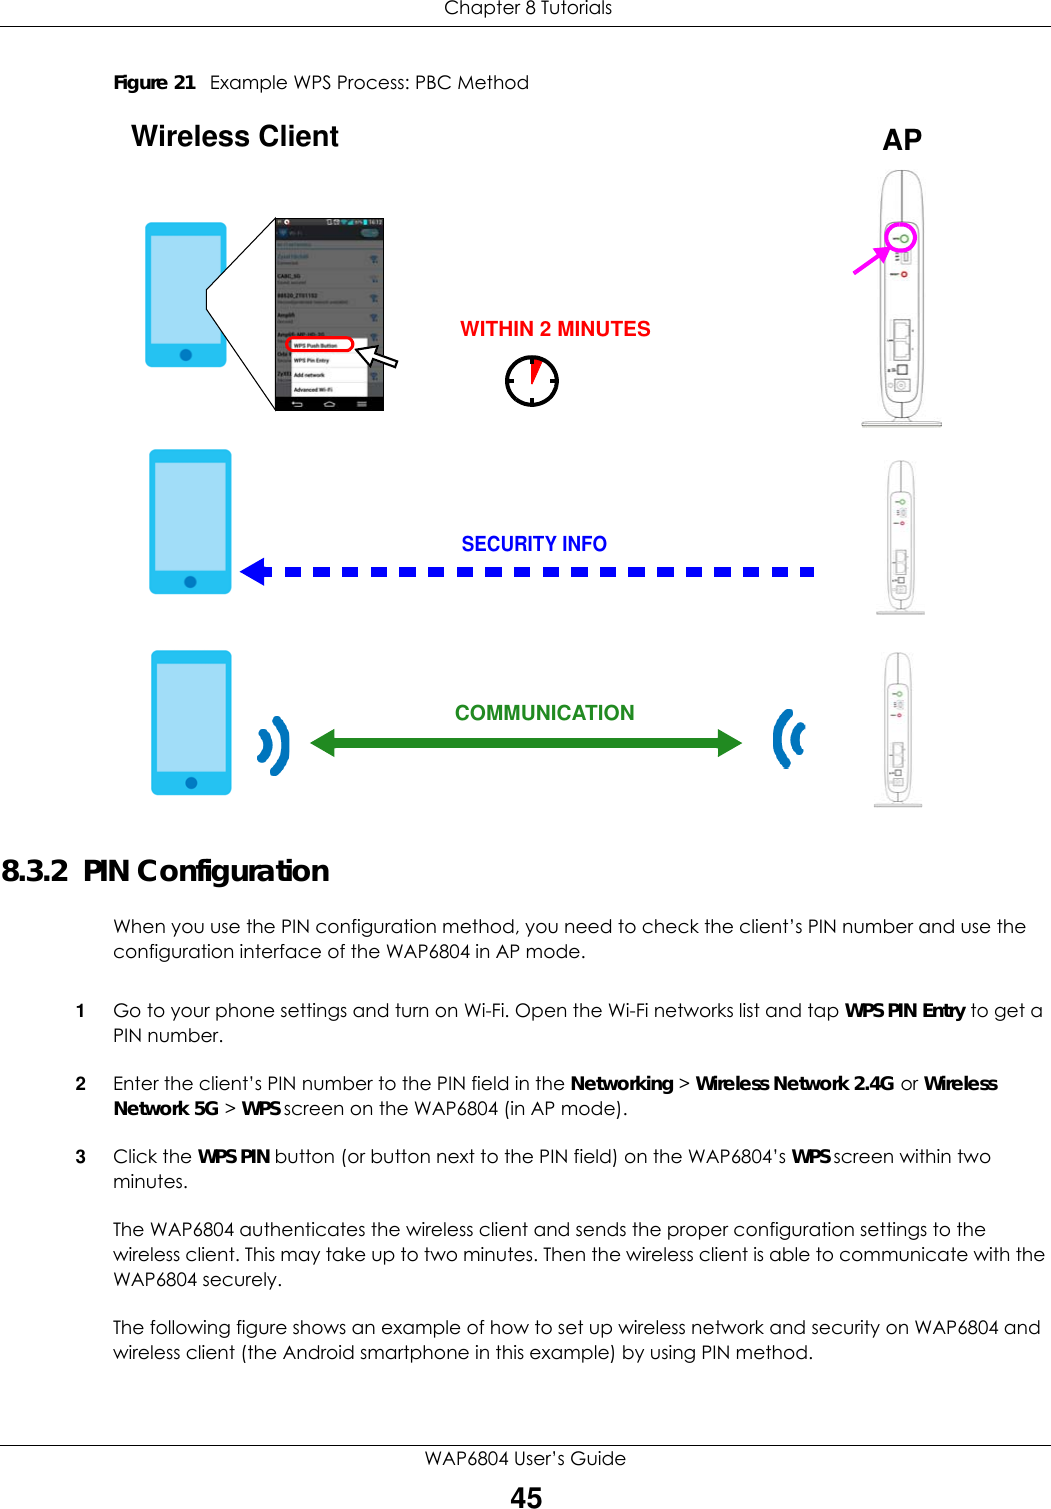  Chapter 8 TutorialsWAP6804 User’s Guide45Figure 21   Example WPS Process: PBC Method8.3.2  PIN ConfigurationWhen you use the PIN configuration method, you need to check the client’s PIN number and use the configuration interface of the WAP6804 in AP mode.1Go to your phone settings and turn on Wi-Fi. Open the Wi-Fi networks list and tap WPS PIN Entry to get a PIN number.2Enter the client’s PIN number to the PIN field in the Networking &gt; Wireless Network 2.4G or Wireless Network 5G &gt; WPS screen on the WAP6804 (in AP mode).3Click the WPS PIN button (or button next to the PIN field) on the WAP6804’s WPS screen within two minutes.The WAP6804 authenticates the wireless client and sends the proper configuration settings to the wireless client. This may take up to two minutes. Then the wireless client is able to communicate with the WAP6804 securely. The following figure shows an example of how to set up wireless network and security on WAP6804 and wireless client (the Android smartphone in this example) by using PIN method. Wireless Client    SECURITY INFOCOMMUNICATIONWITHIN 2 MINUTESAP